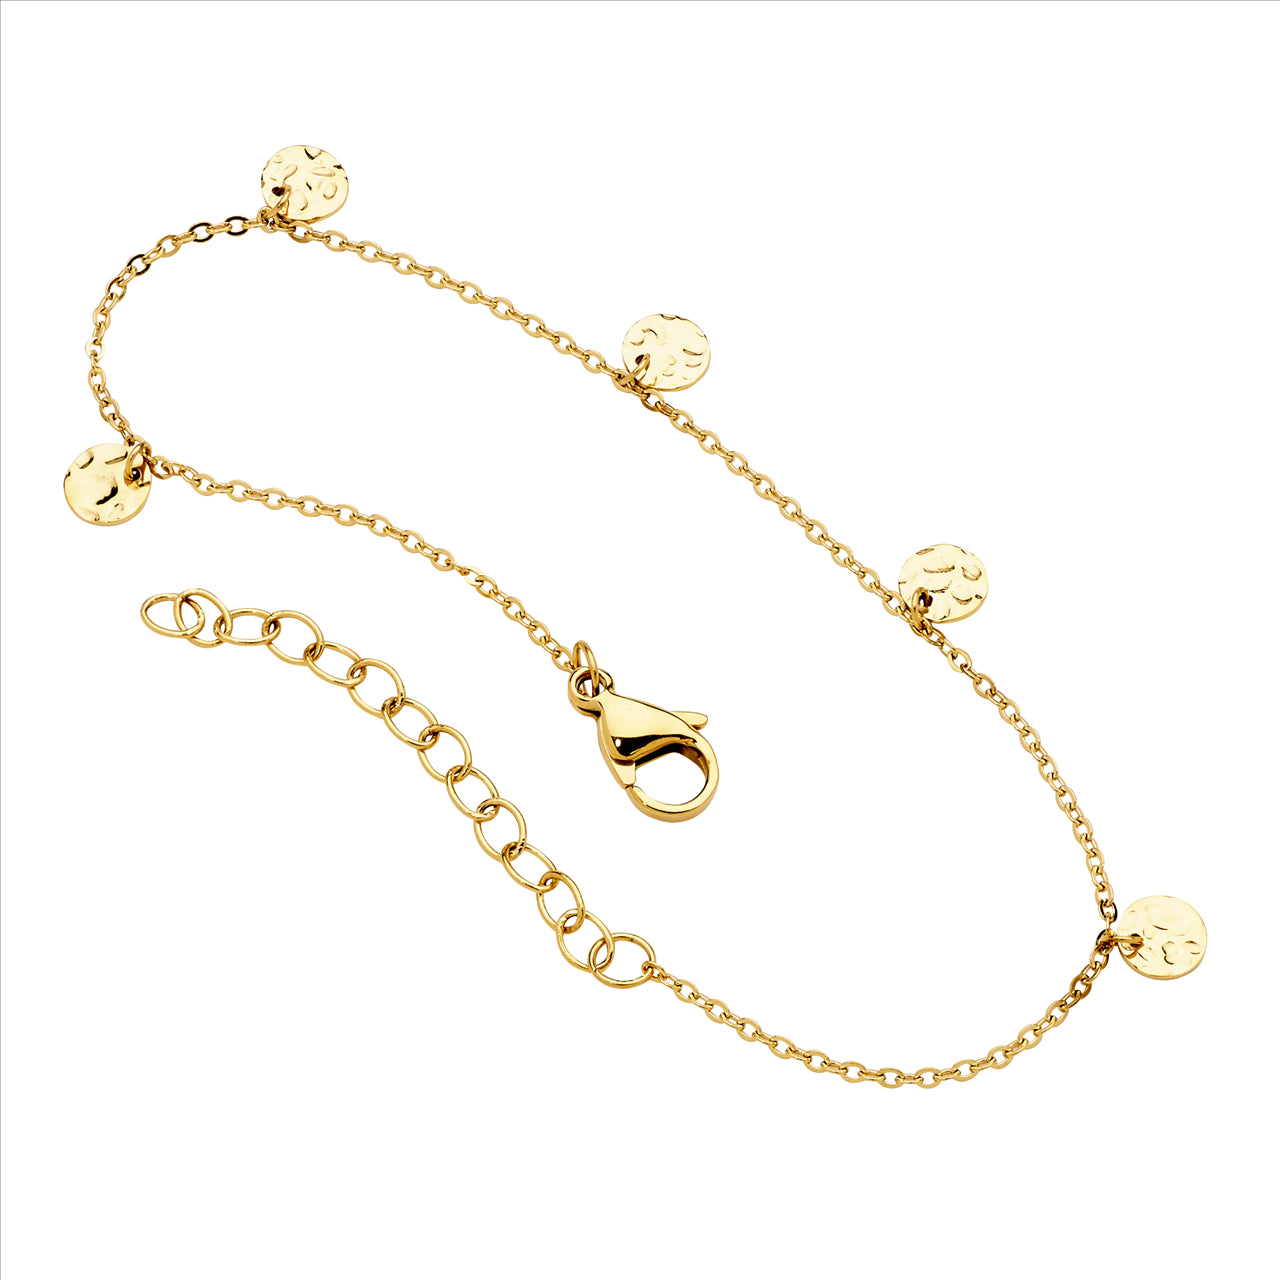 Stainless Steel, Gold Plated Disk Feature Bracelet